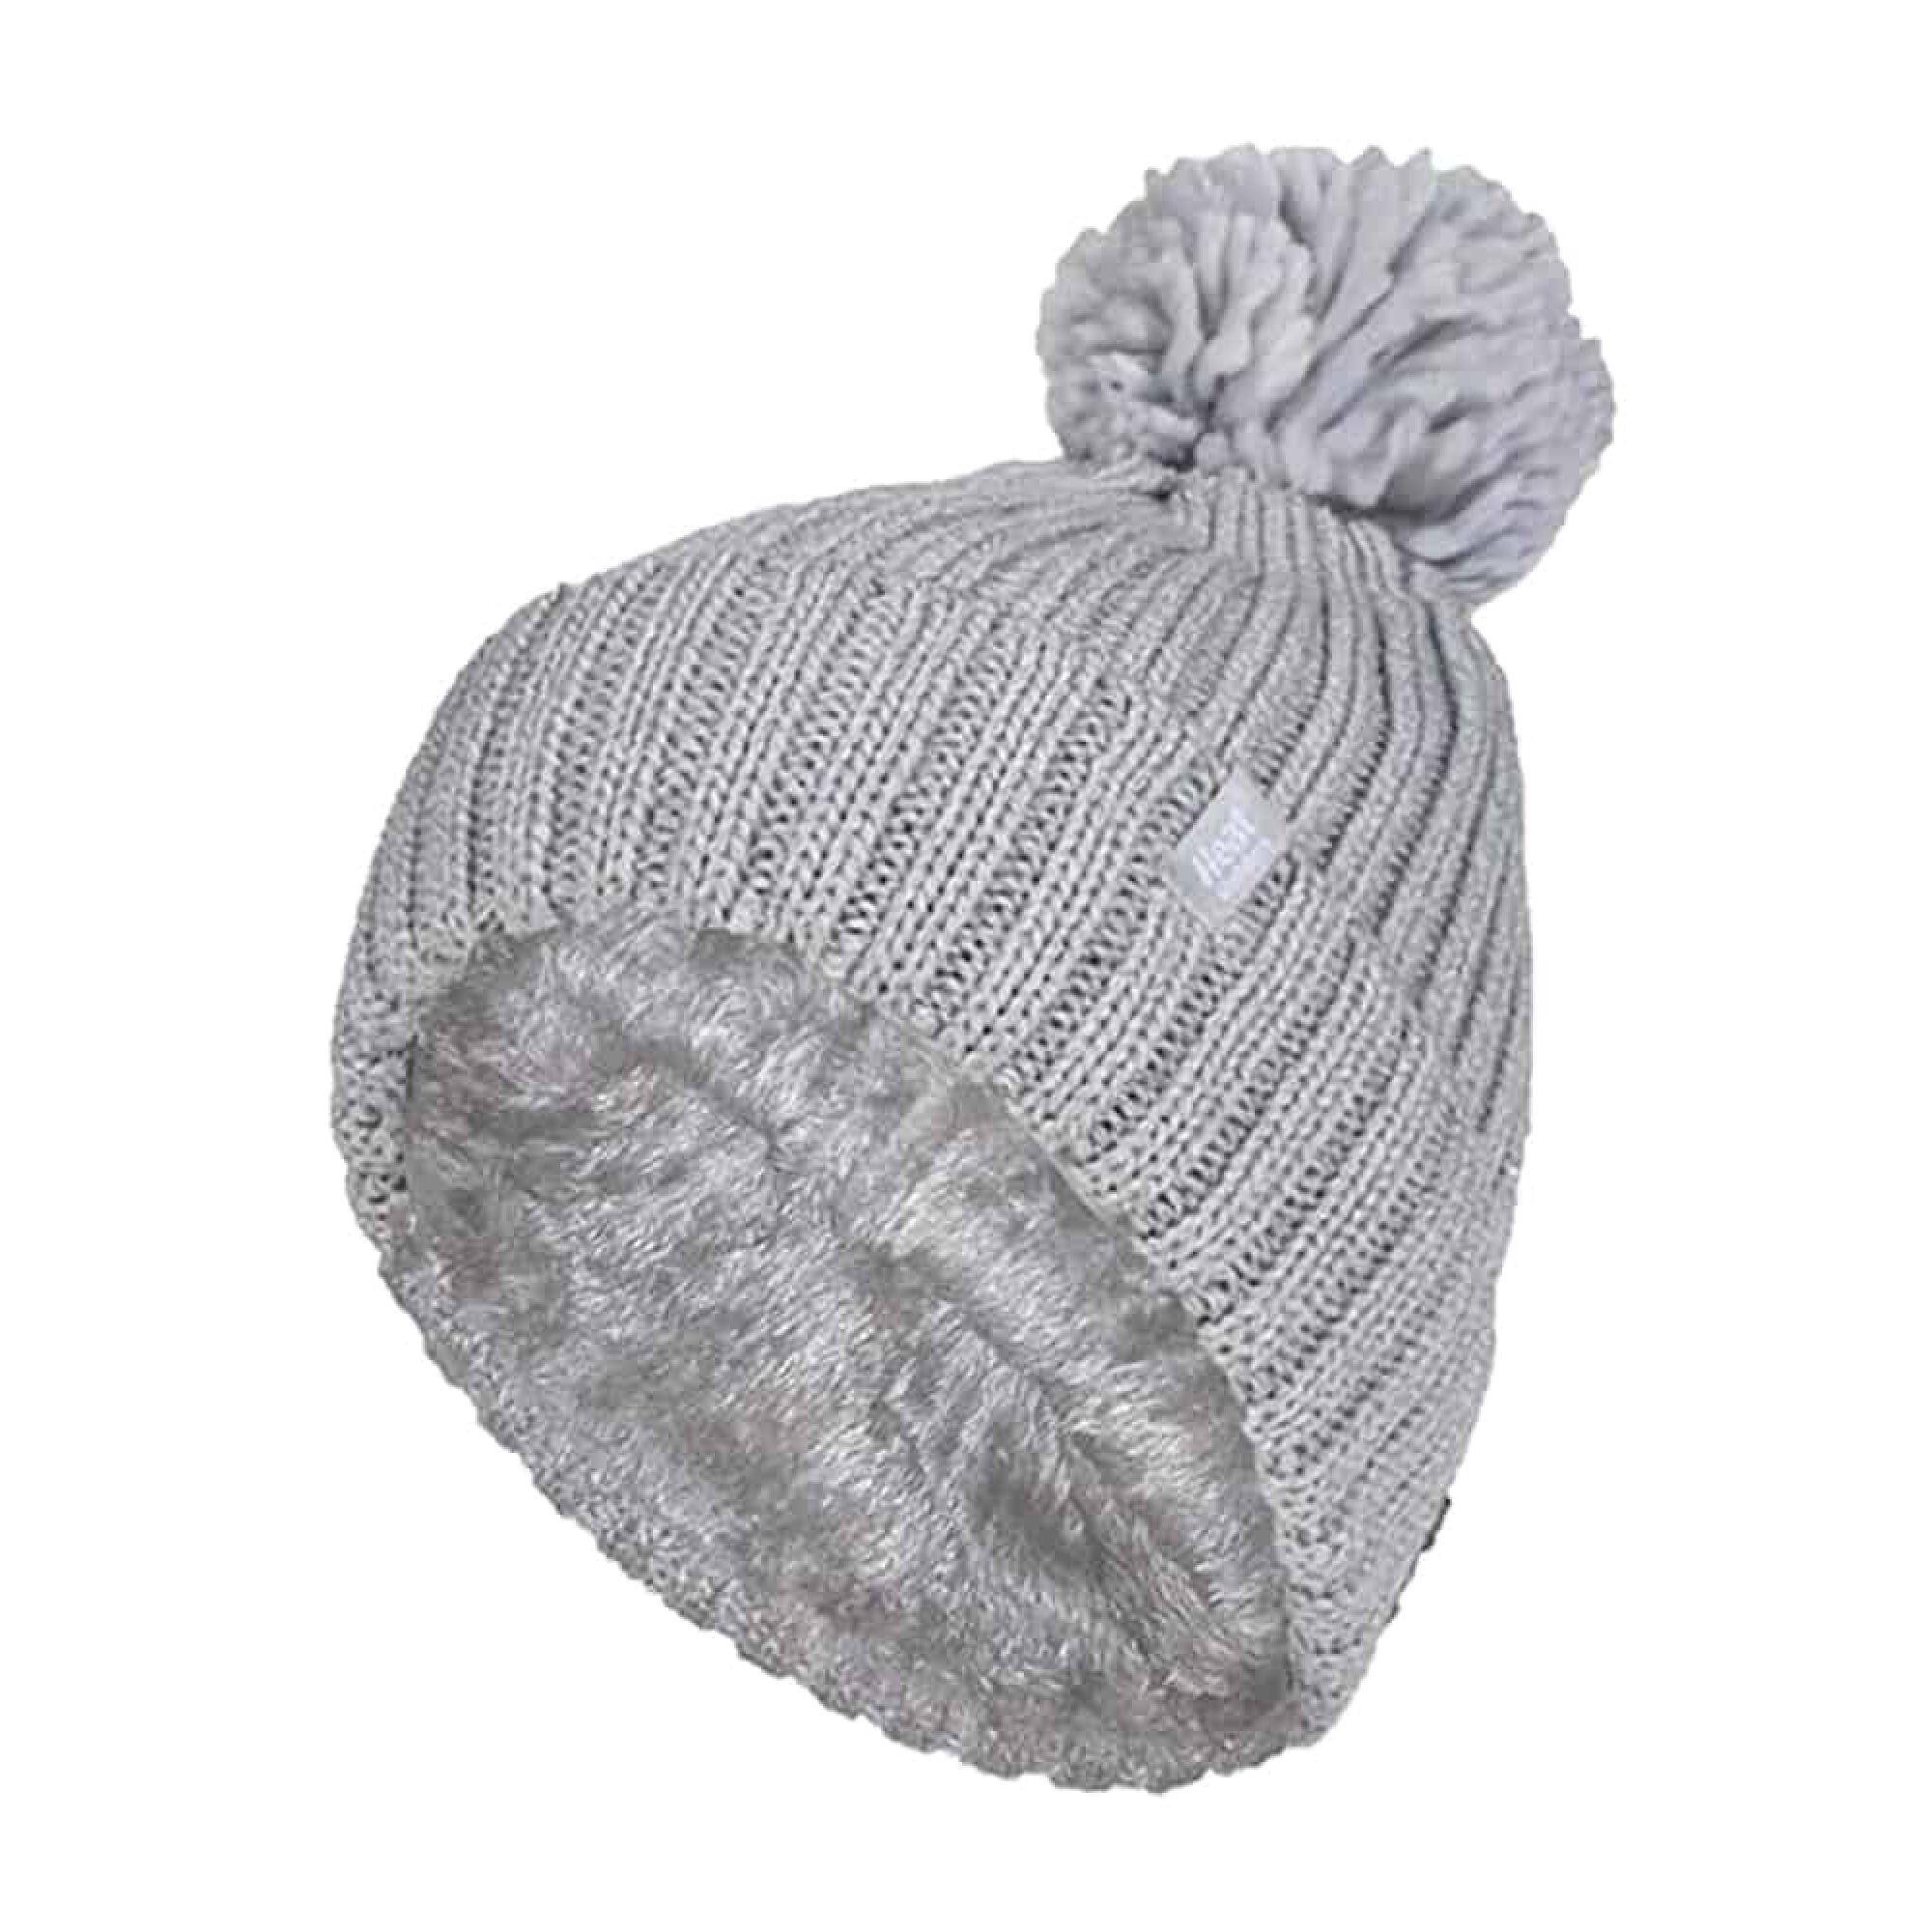 Ladies Ribbed Cuffed Thermal Insulated Winter Pom Pom Bobble Hat 1/4